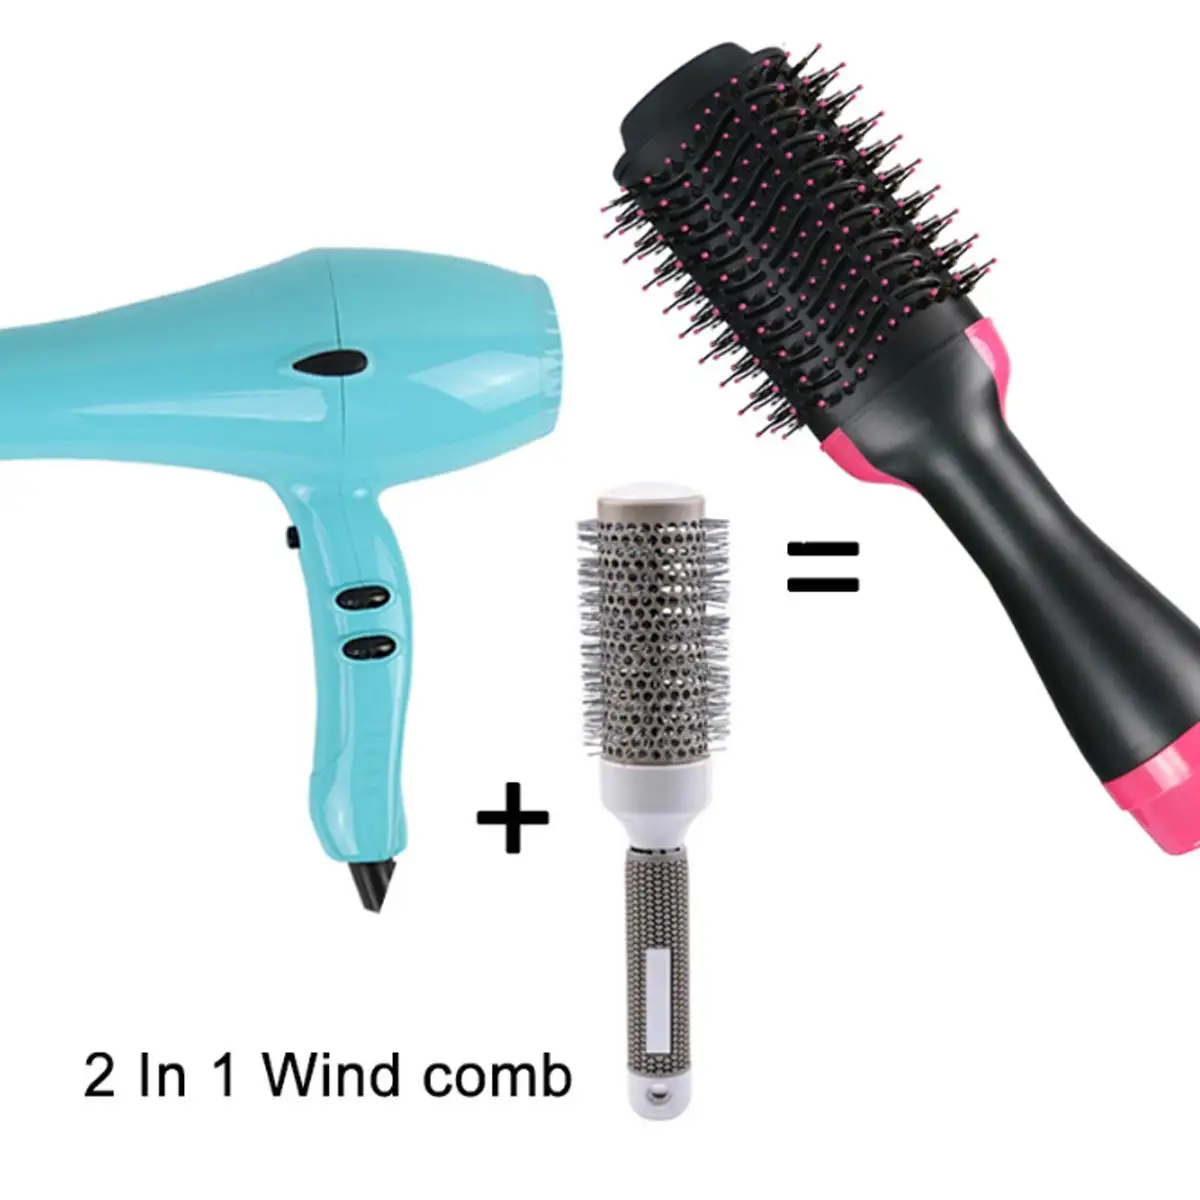 

2 in 1 Multifunctional Hair Dryer & Volumizer Rotating Hair Brush Roller Rotate Styler Comb Styling Straightening Curling Iron